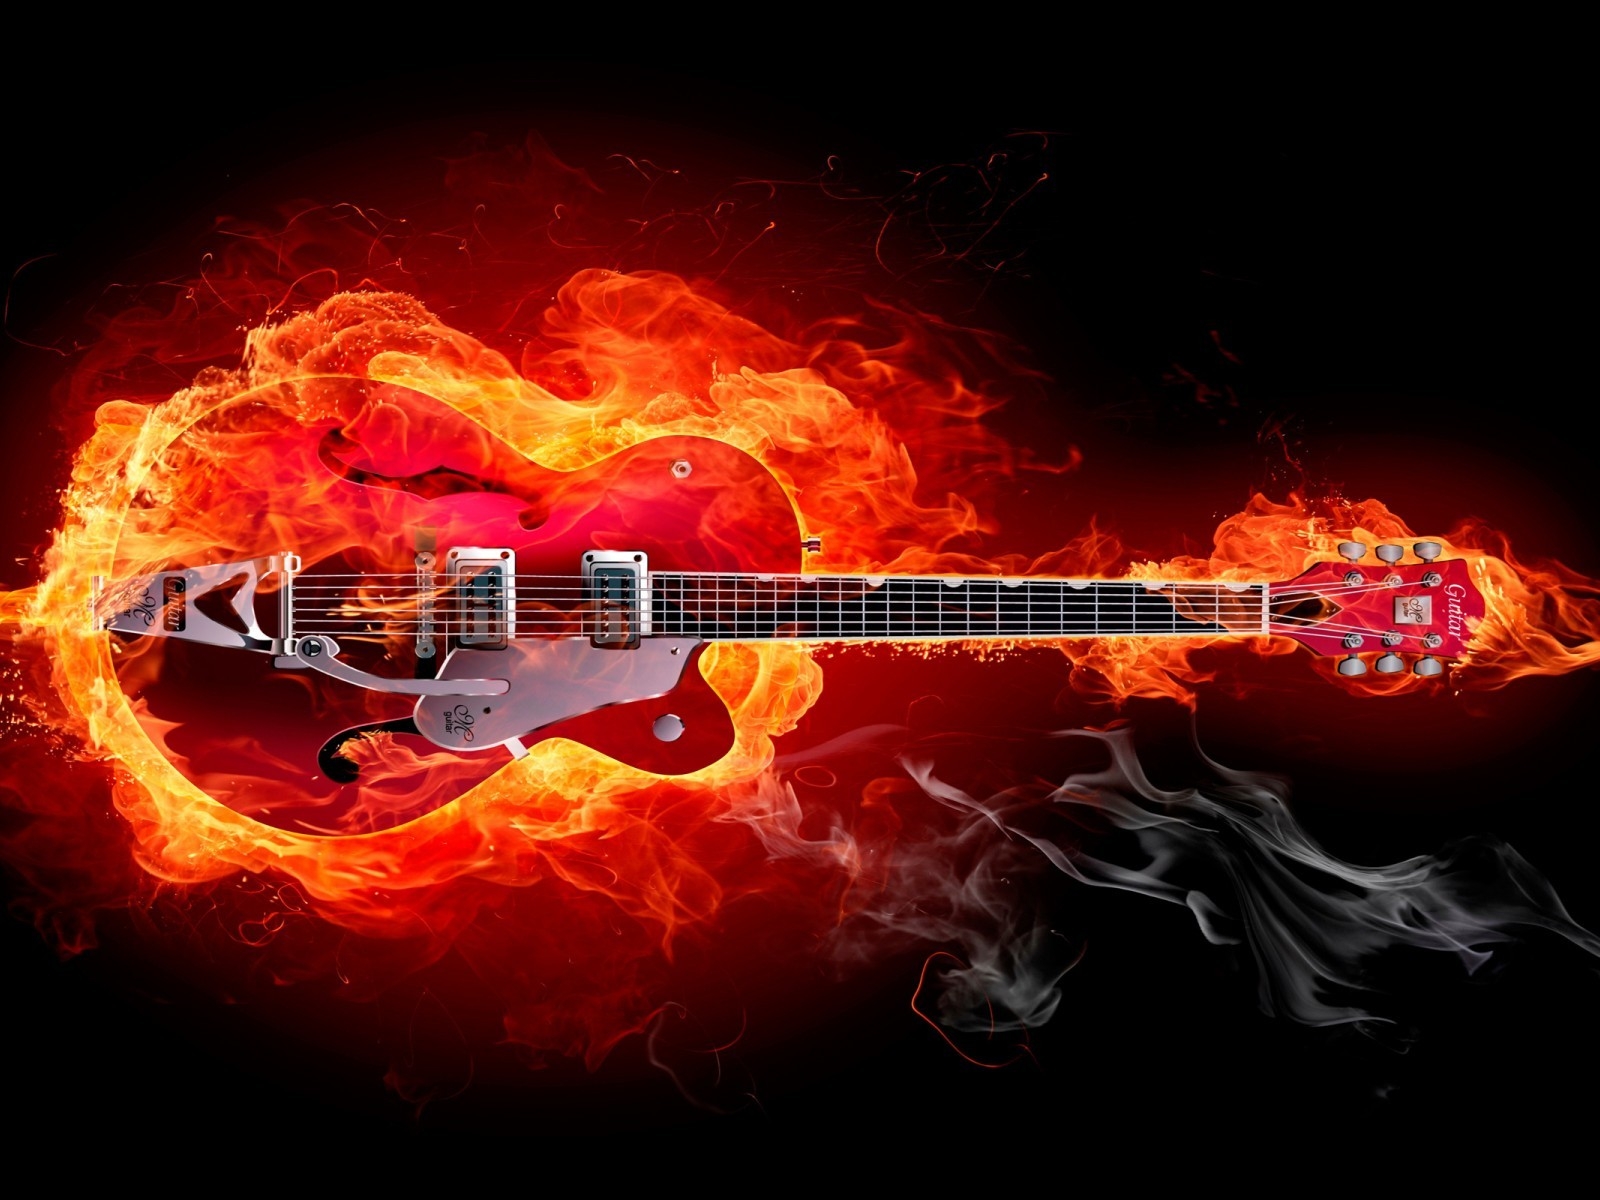 Fire Guitar for 1600 x 1200 resolution